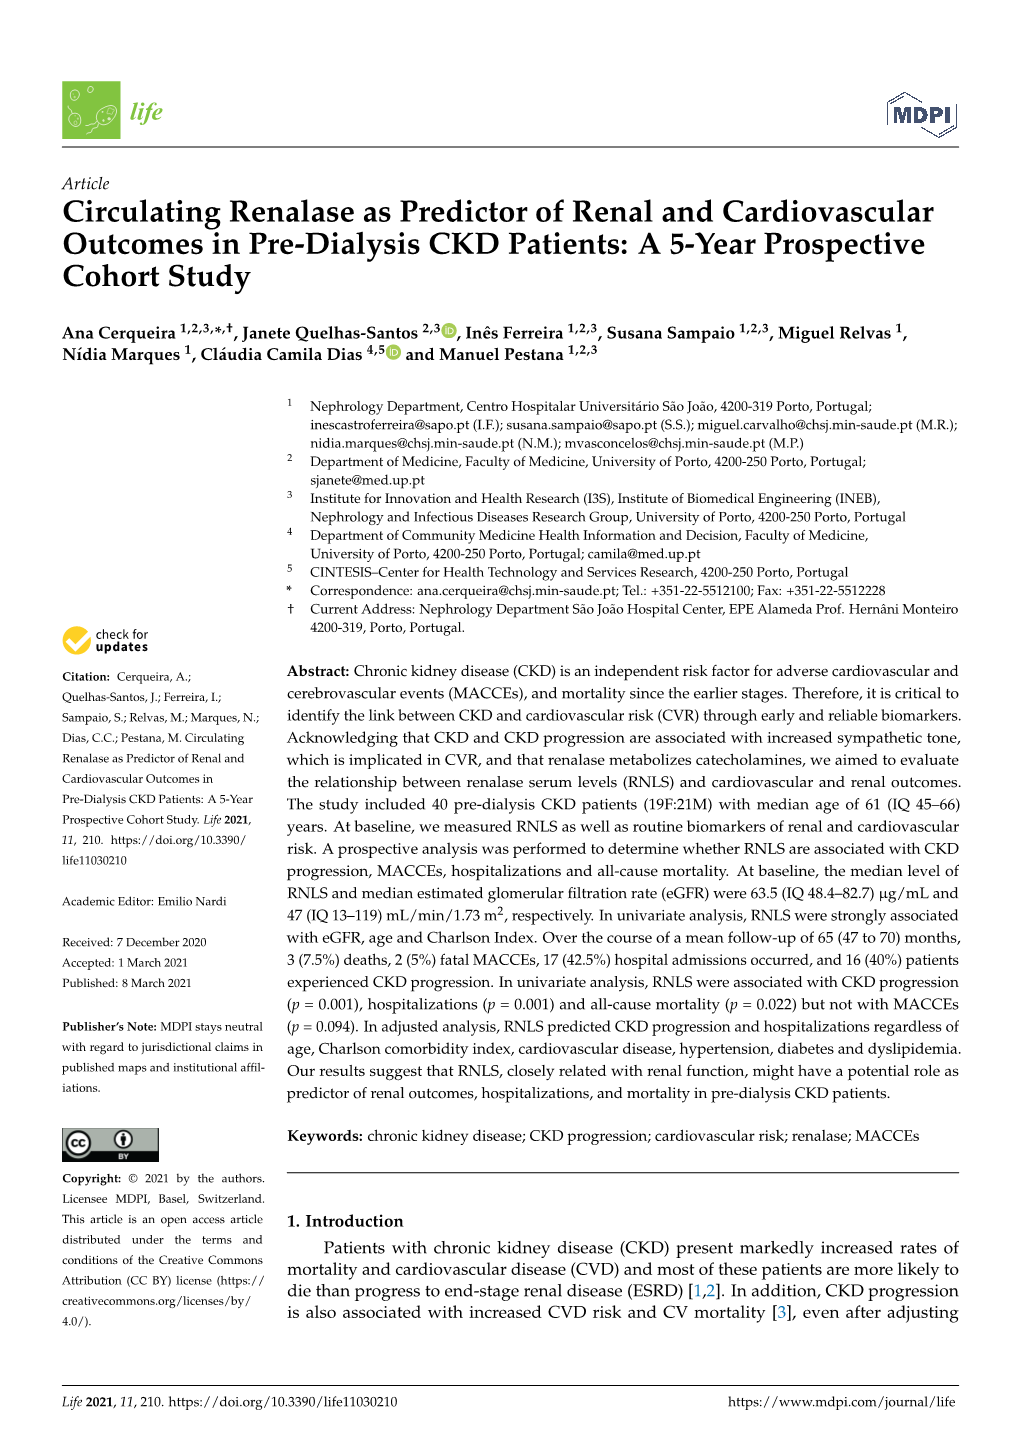 Circulating Renalase As Predictor of Renal and Cardiovascular Outcomes in Pre-Dialysis CKD Patients: a 5-Year Prospective Cohort Study